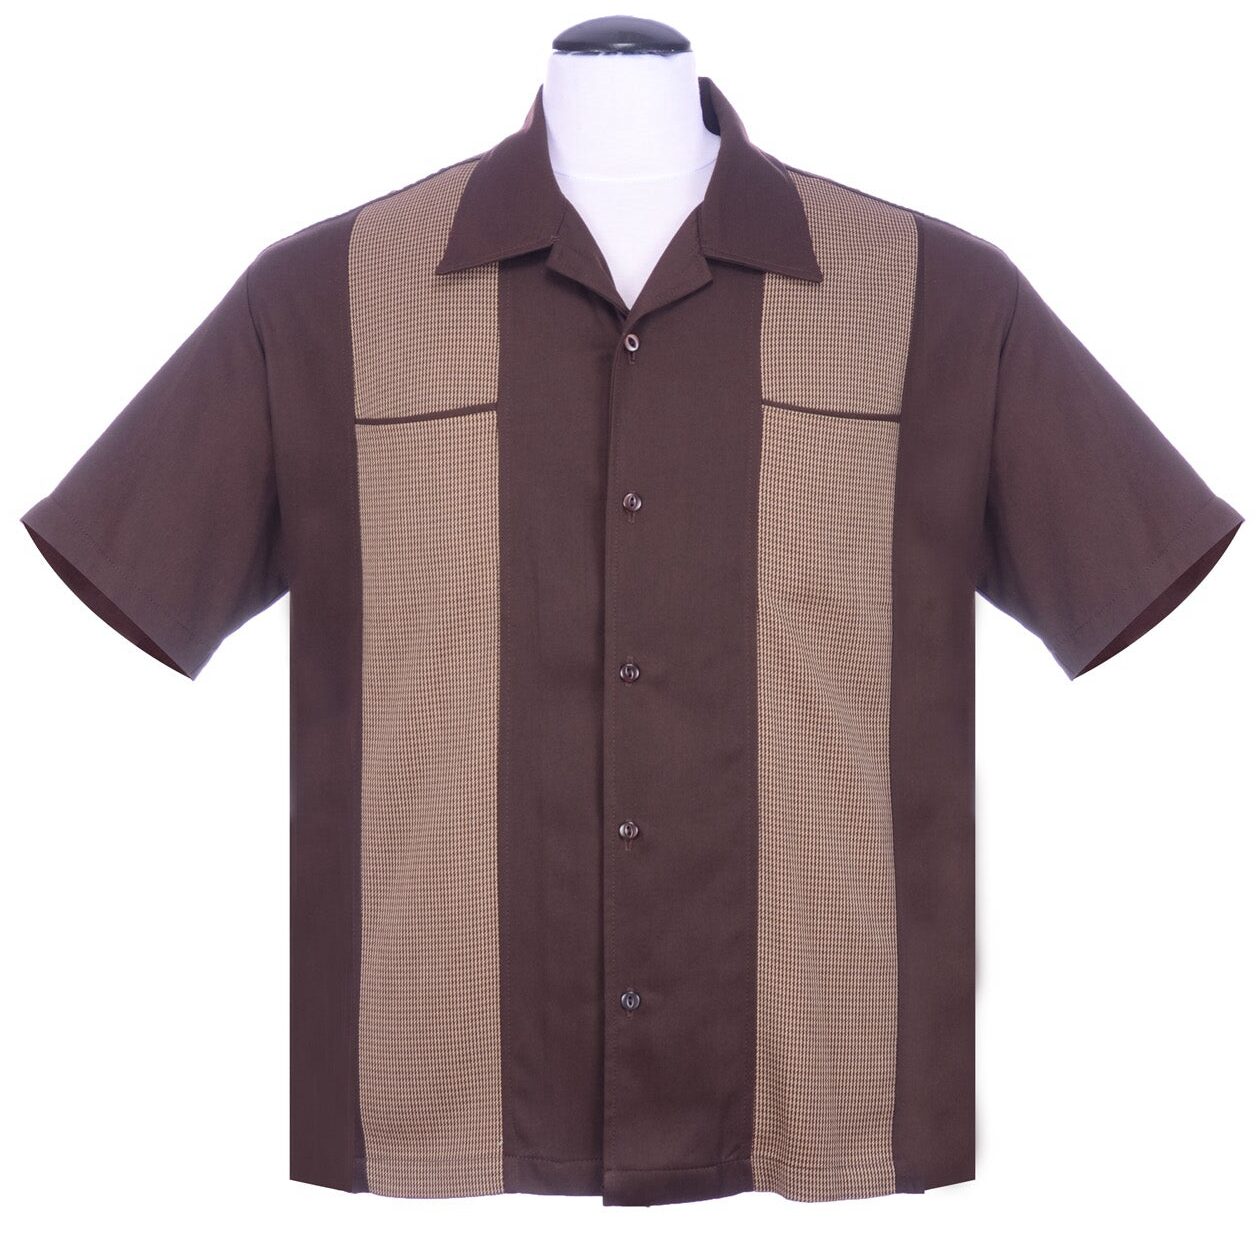 Houndstooth Panel Bowling Shirt by Steady Clothing